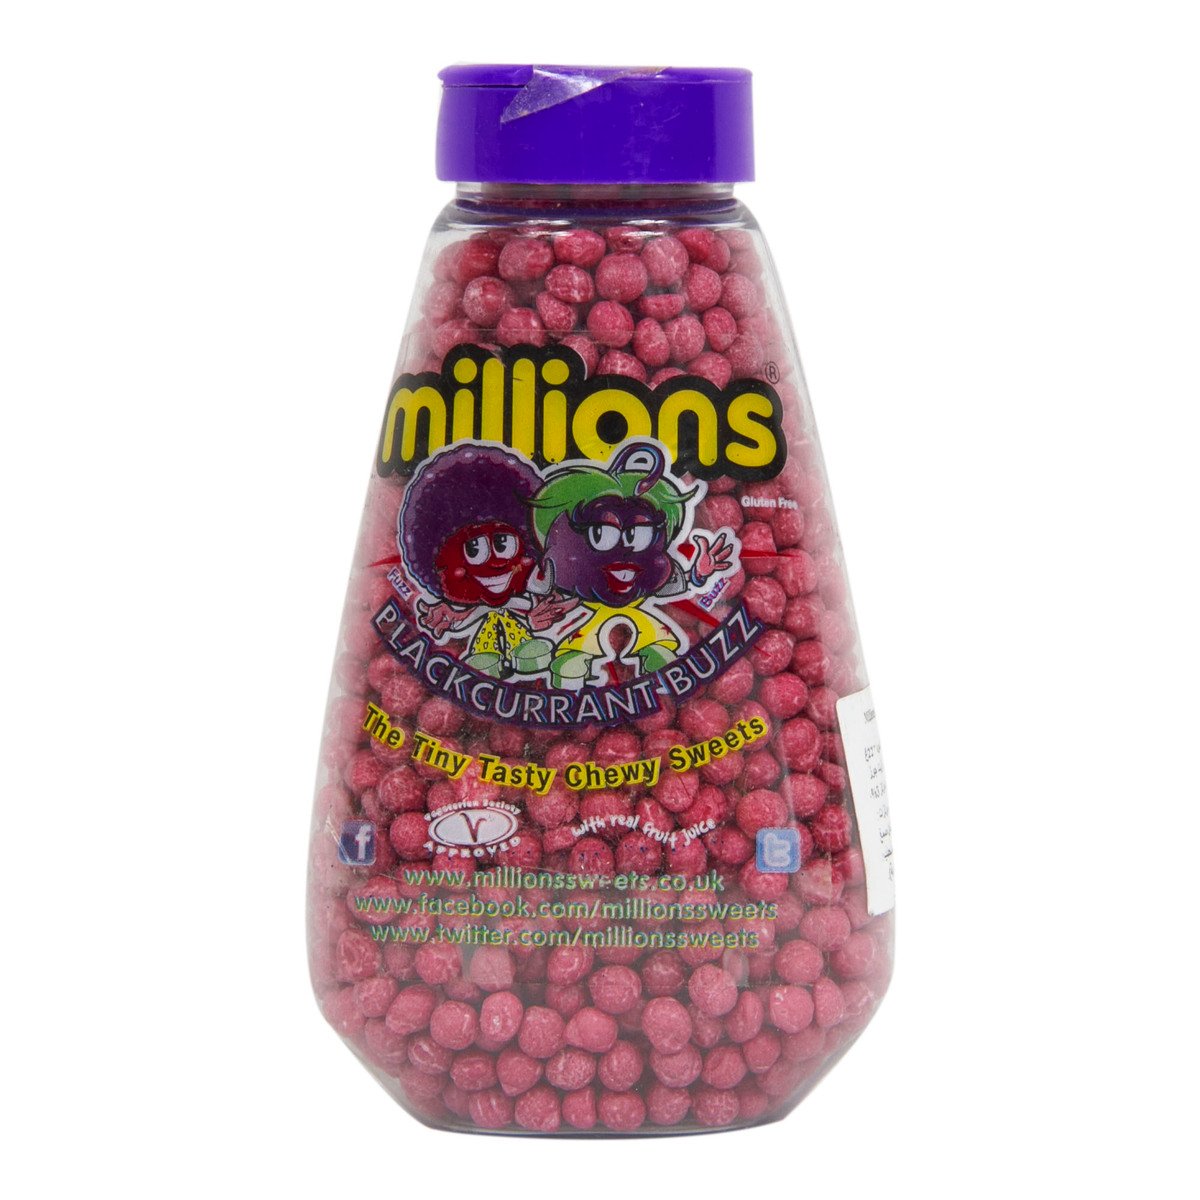 Millions Black Currant Buzz Chew Sweets 227 g